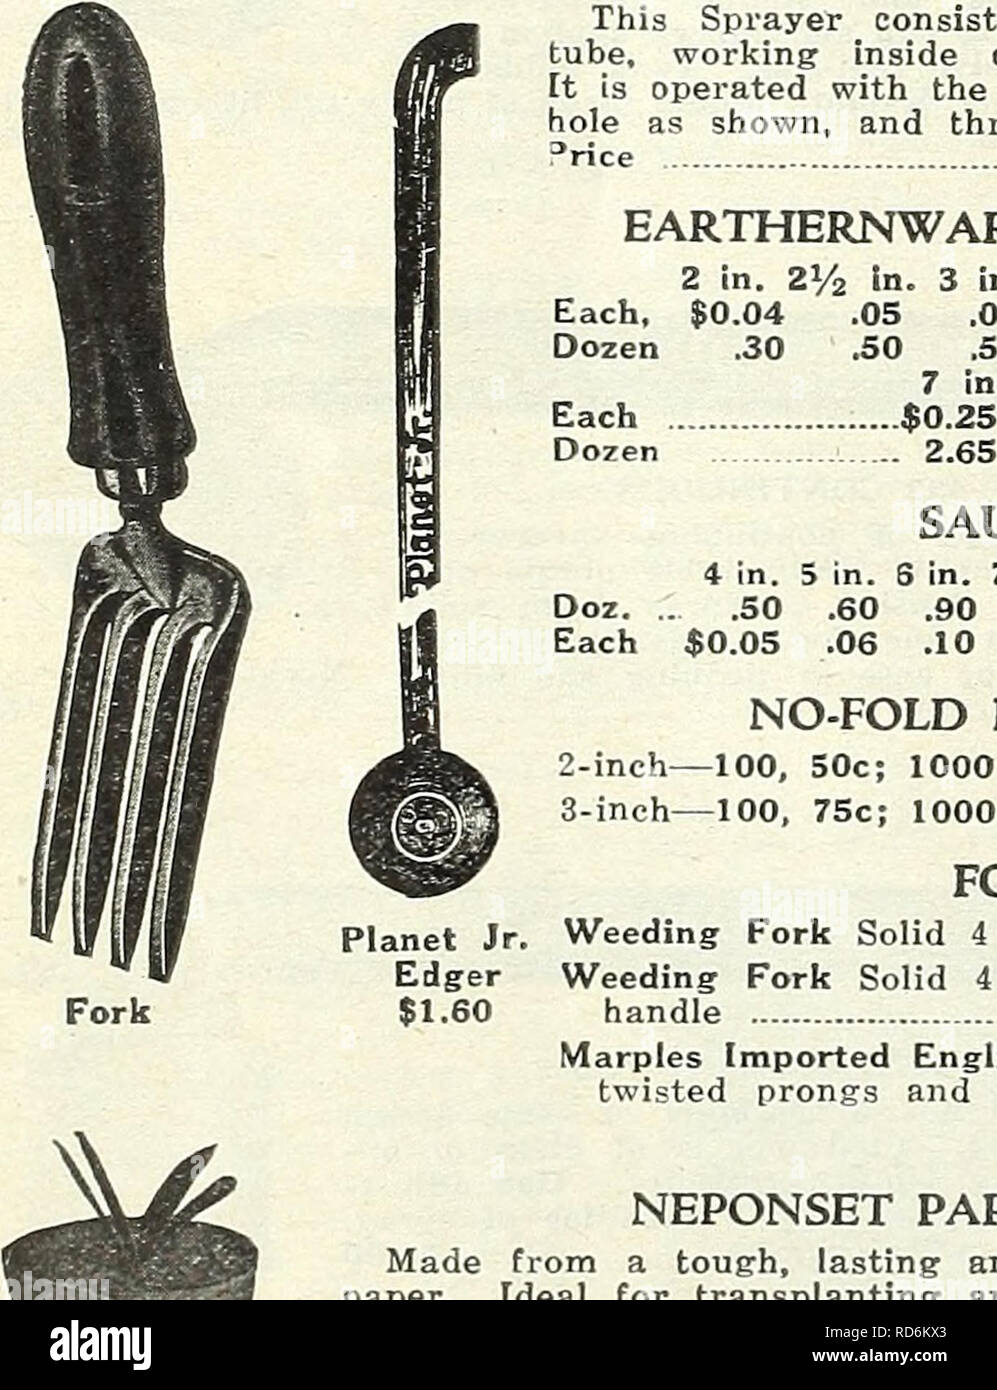 . Currie Bros. : fifty-eighth year 1933. Flowers Seeds Catalogs; Bulbs (Plants) Seeds Catalogs; Vegetables Seeds Catalogs; Nurseries (Horticulture) Catalogs; Plants, Ornamental Catalogs; Gardening Equipment and supplies Catalogs. This Sprayer consists of one seamless brass tube, working inside of an outer brass tube. It is operated with the finger, through the loop- hole as shown, and throws a fine, misty spray. &quot;rice $1.25 EARTHERNWARE FLOWER POTS 8 in. 9 In. 10 In. 3S .50 .70 3.50 5.50 7.50 SAUCERS S In. 7 In. S In. 9 in. 10 in. 12 In: .90 1.20 1.60 2.25 2.85 4.50 .15 .20 .25 .40 0 .12  Stock Photo